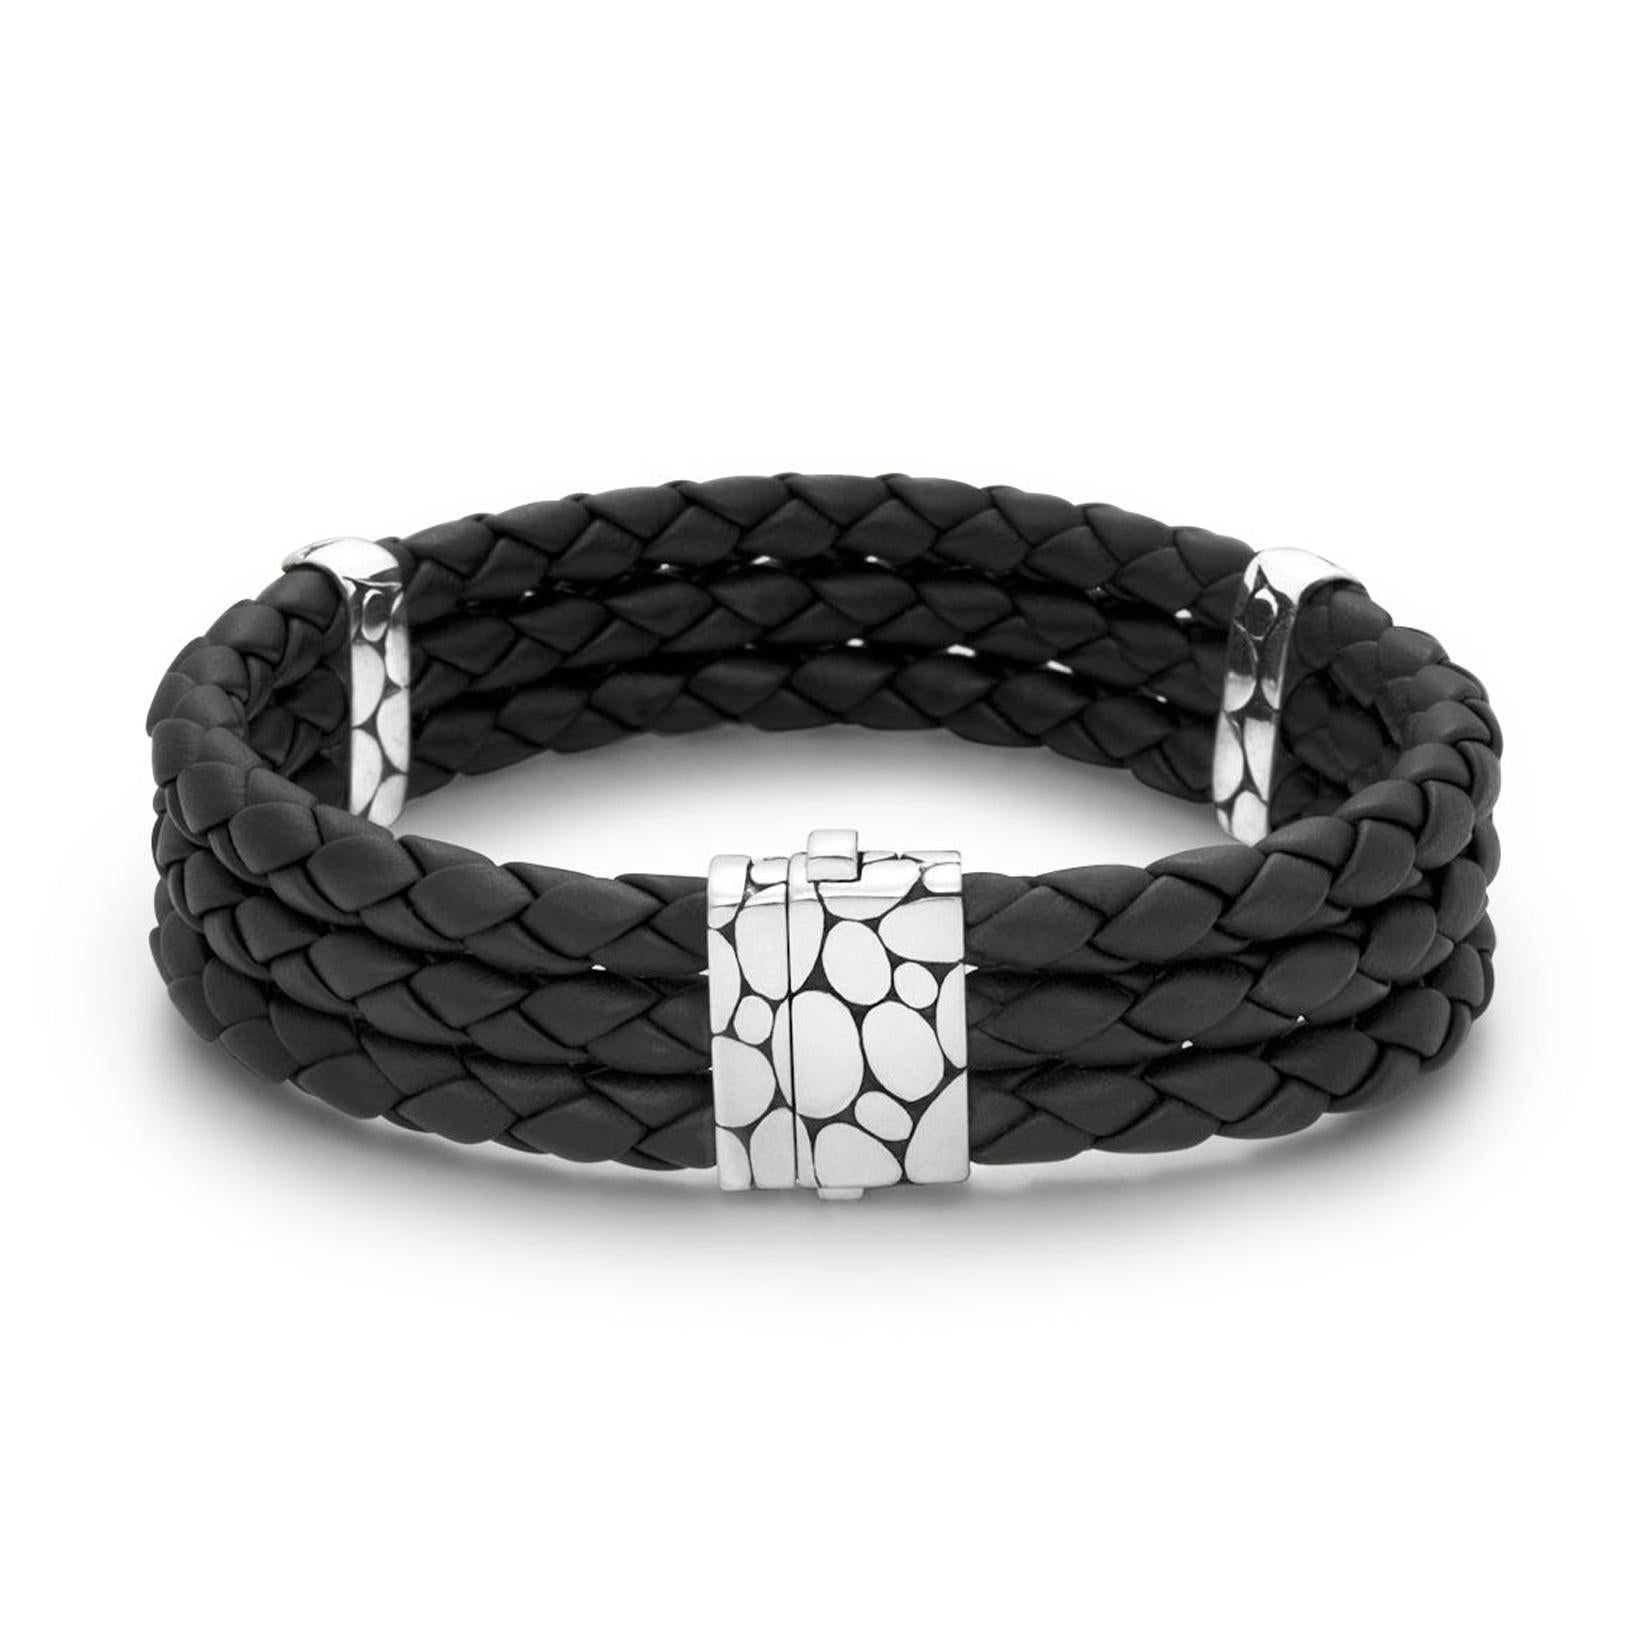 John Hardy triple row black leather bracelet with sterling silver detail clasp and two sterling silver stations.

7 1/2